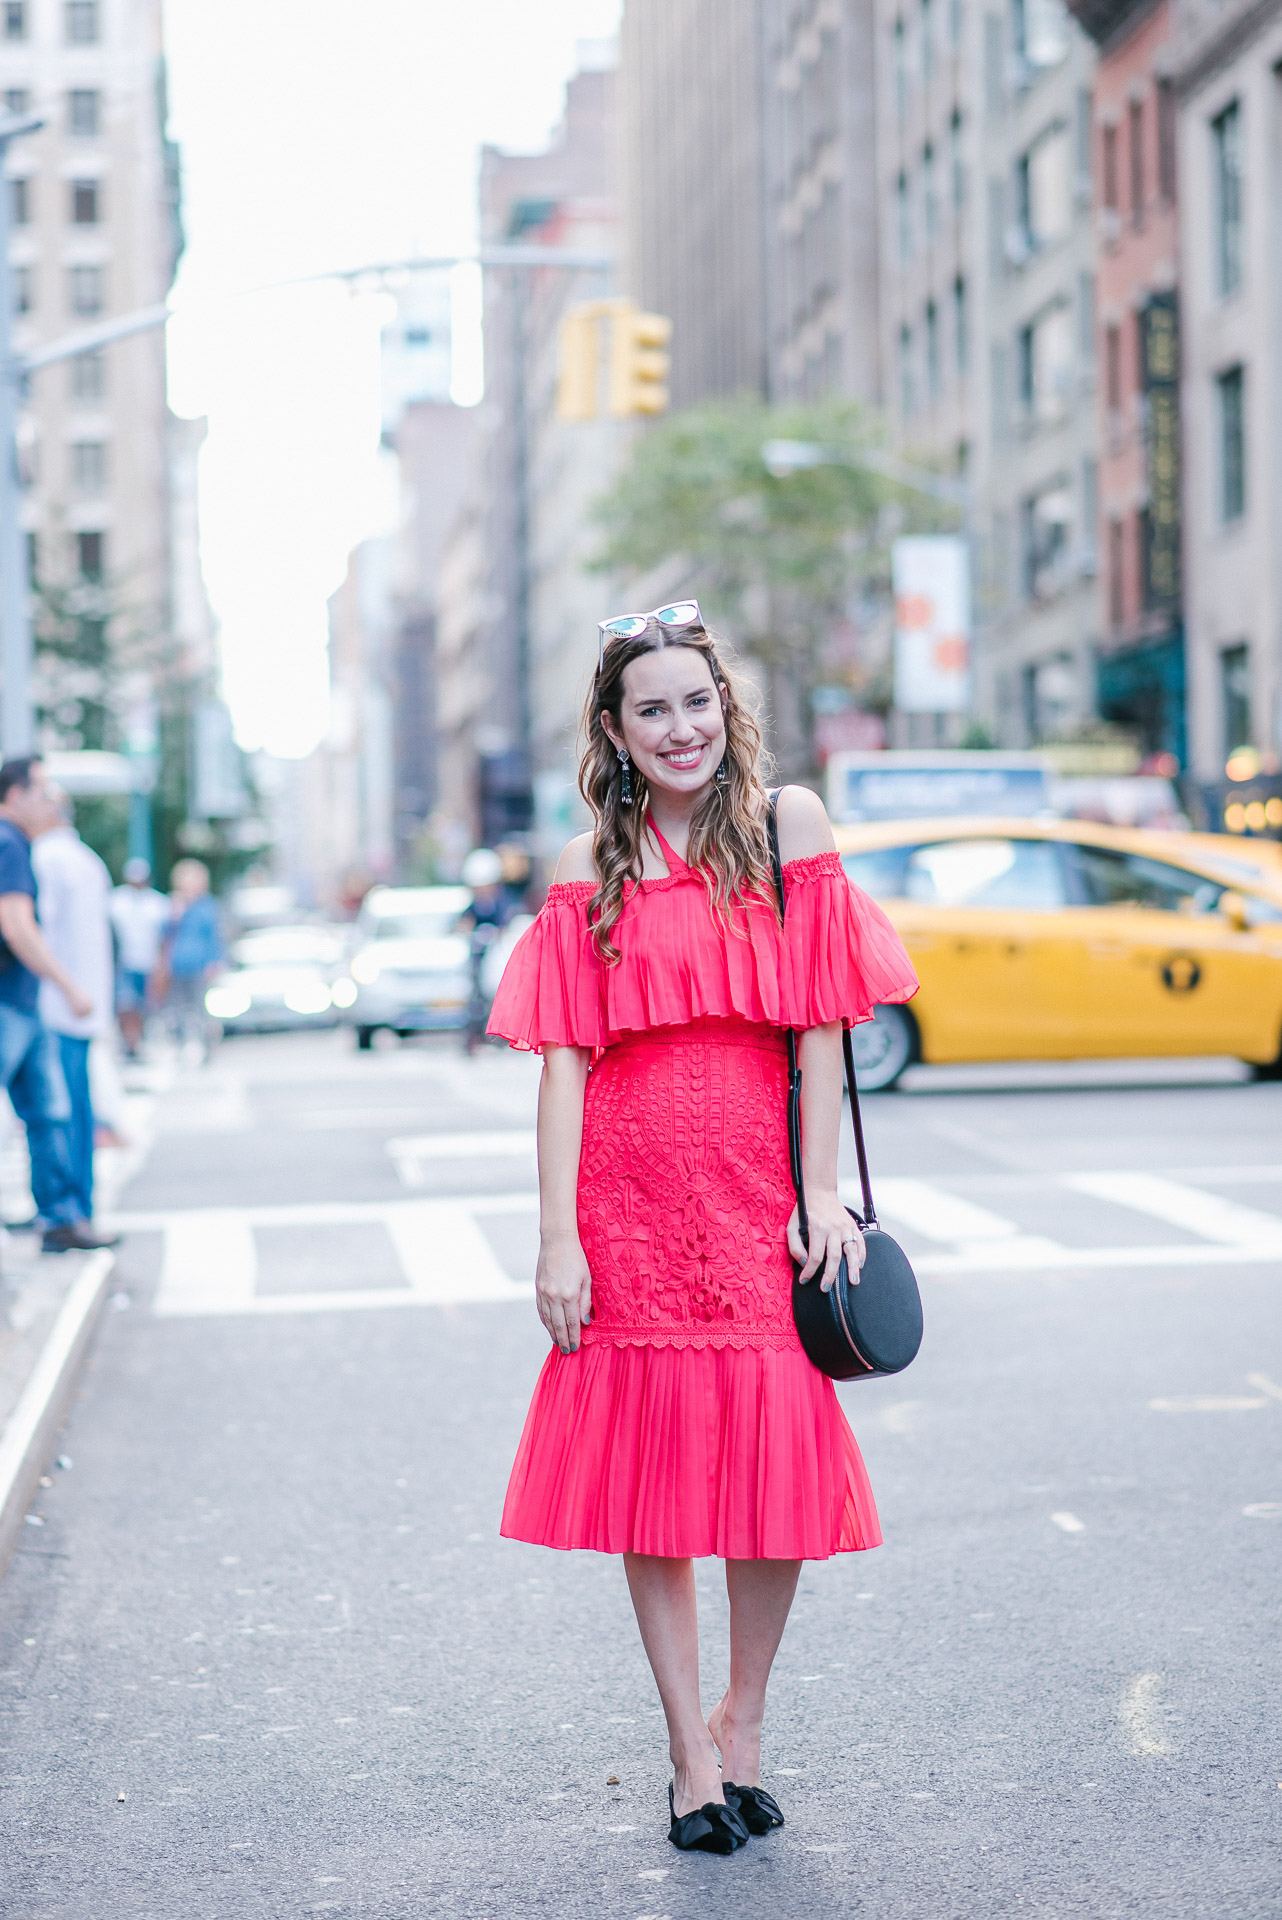 Alice Temperley Coral Berry Lace Cocktail Dress styled on the streets of New York for NYFW.